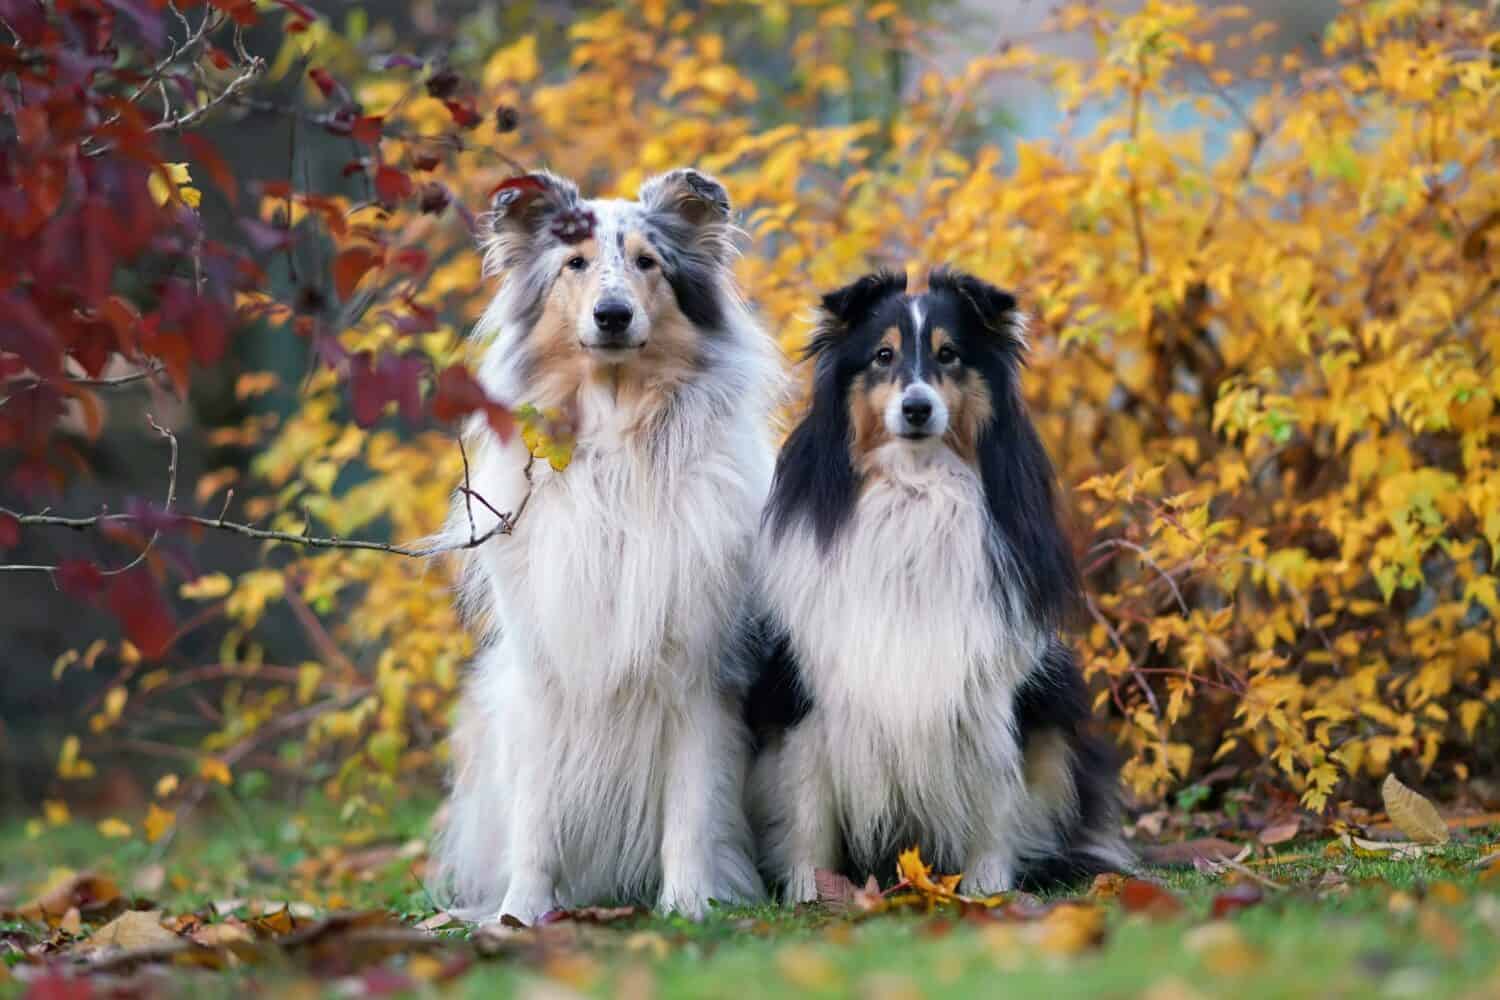 Two obedient Shepherd dogs (blue merle rough Collie and tricolor Sheltie) posing together outdoors sitting on a green grass with fallen leaves in autumn